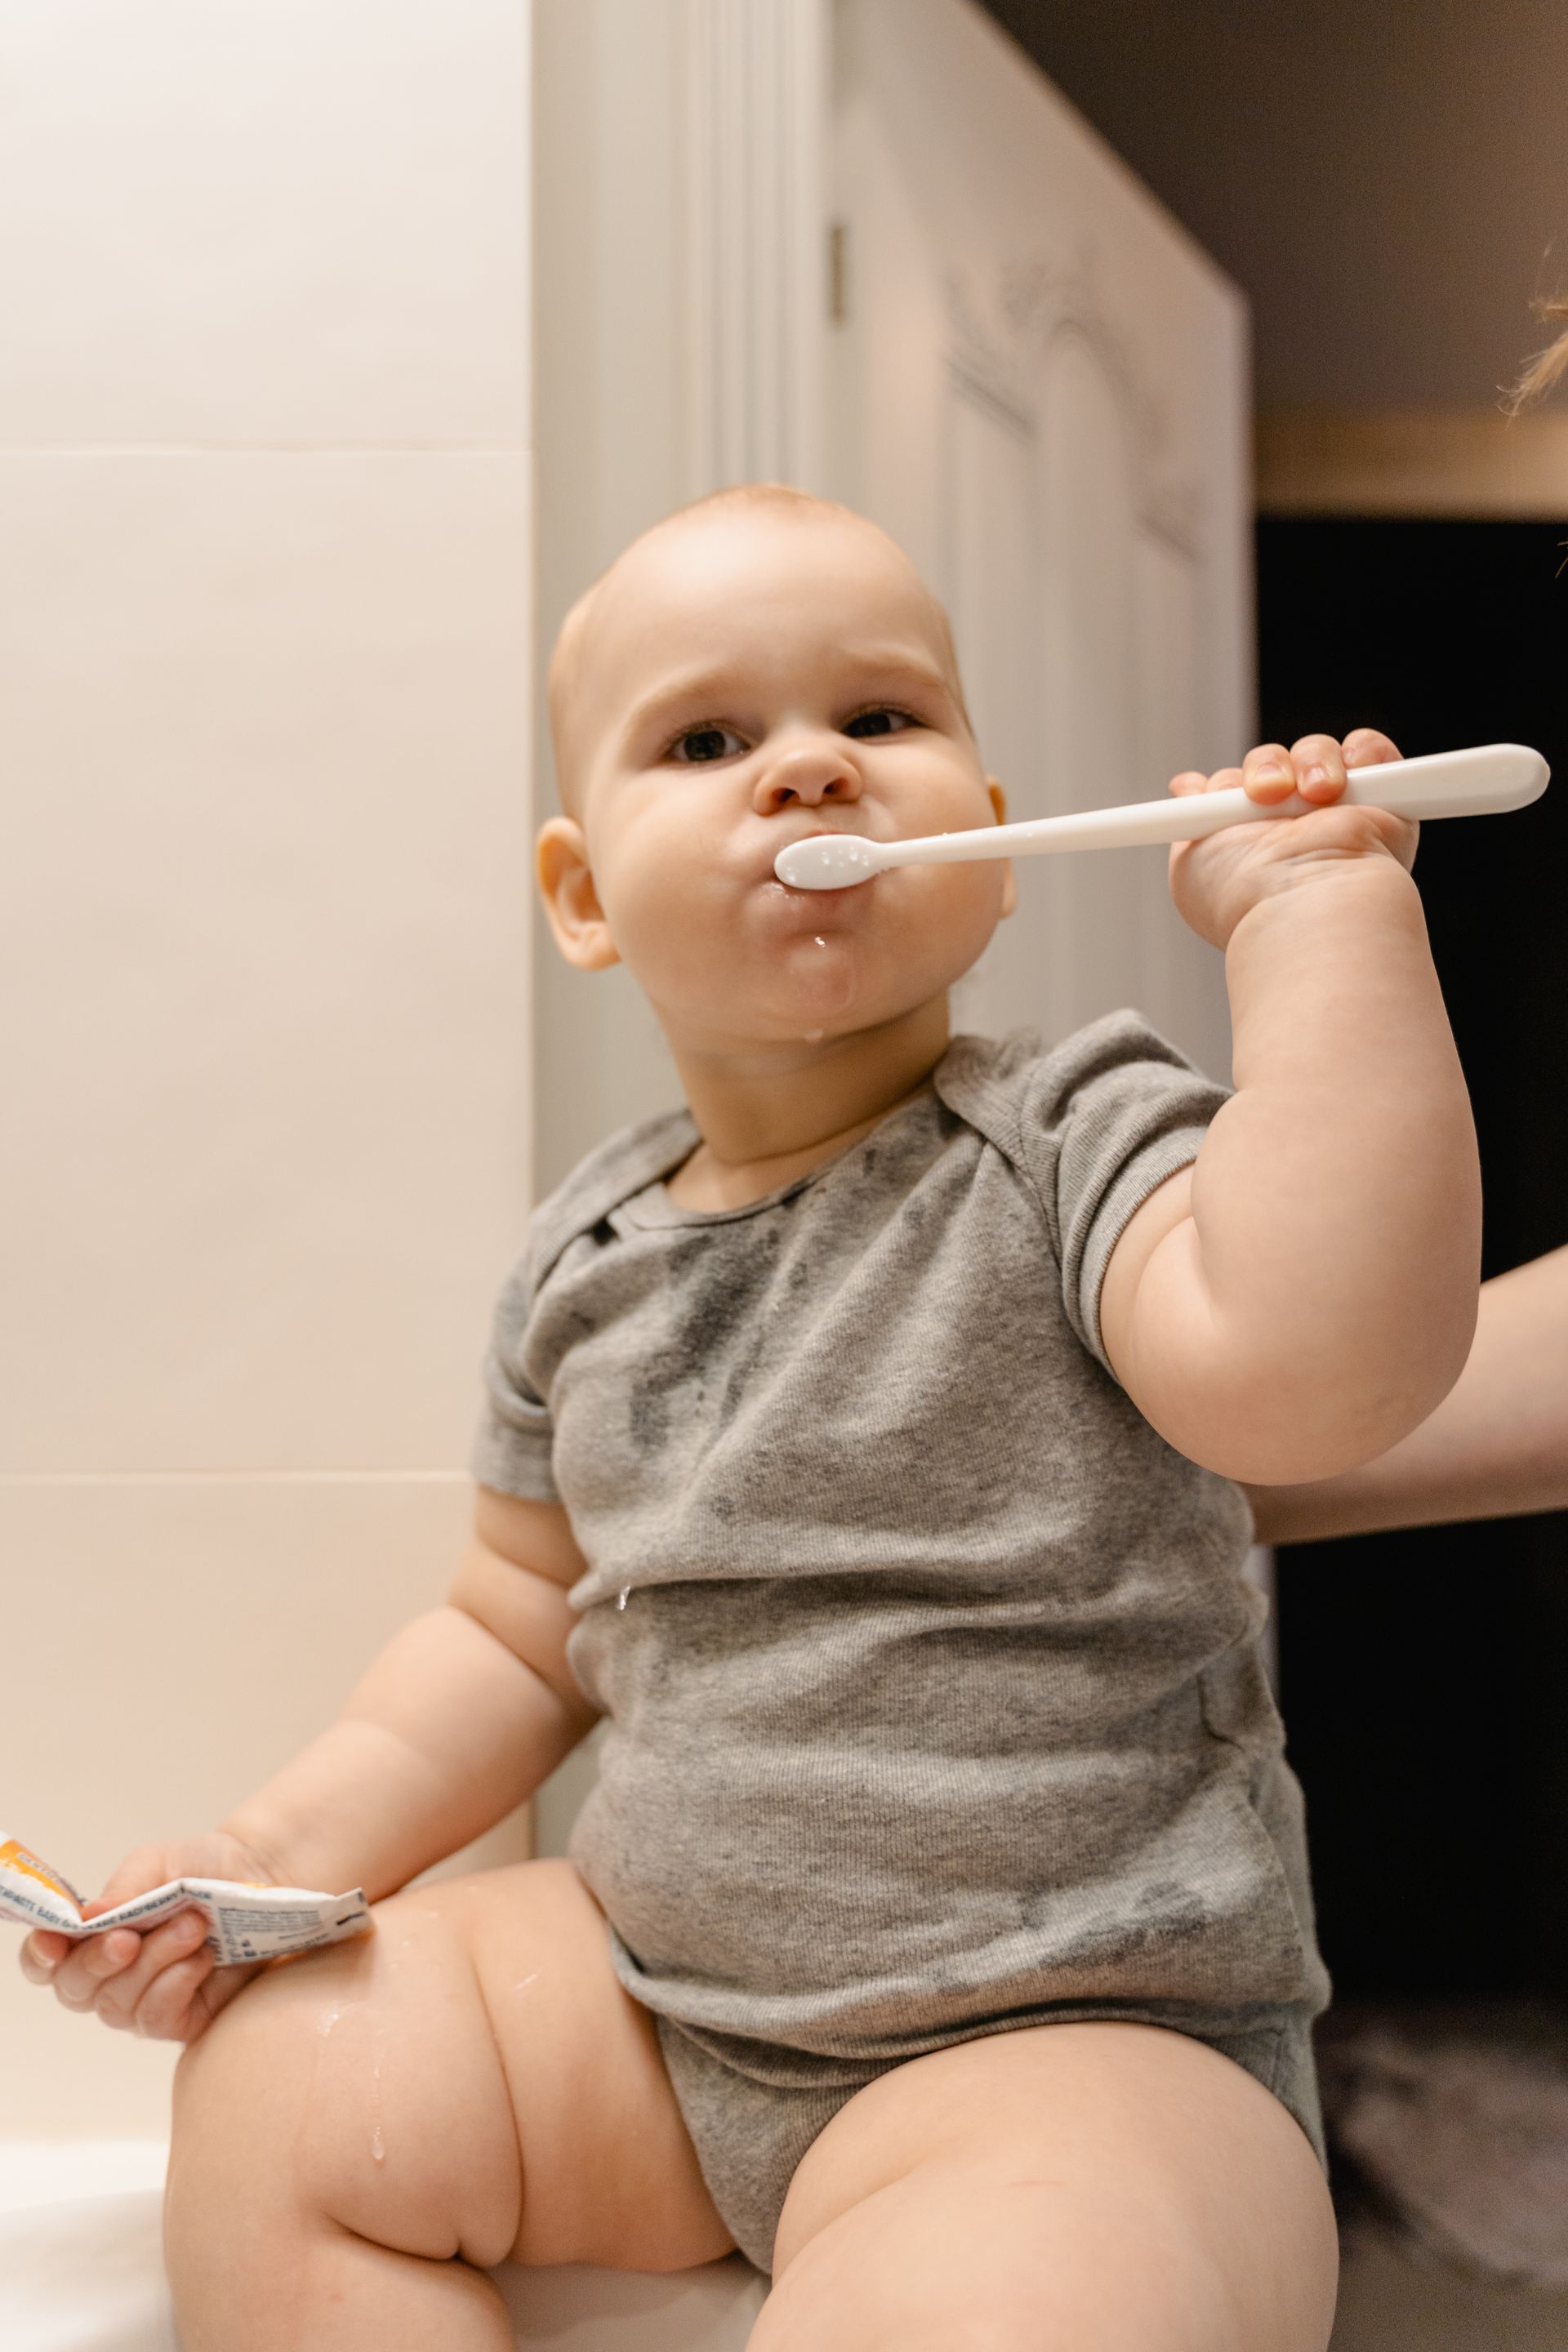 9 month old learning to brush his teeth.